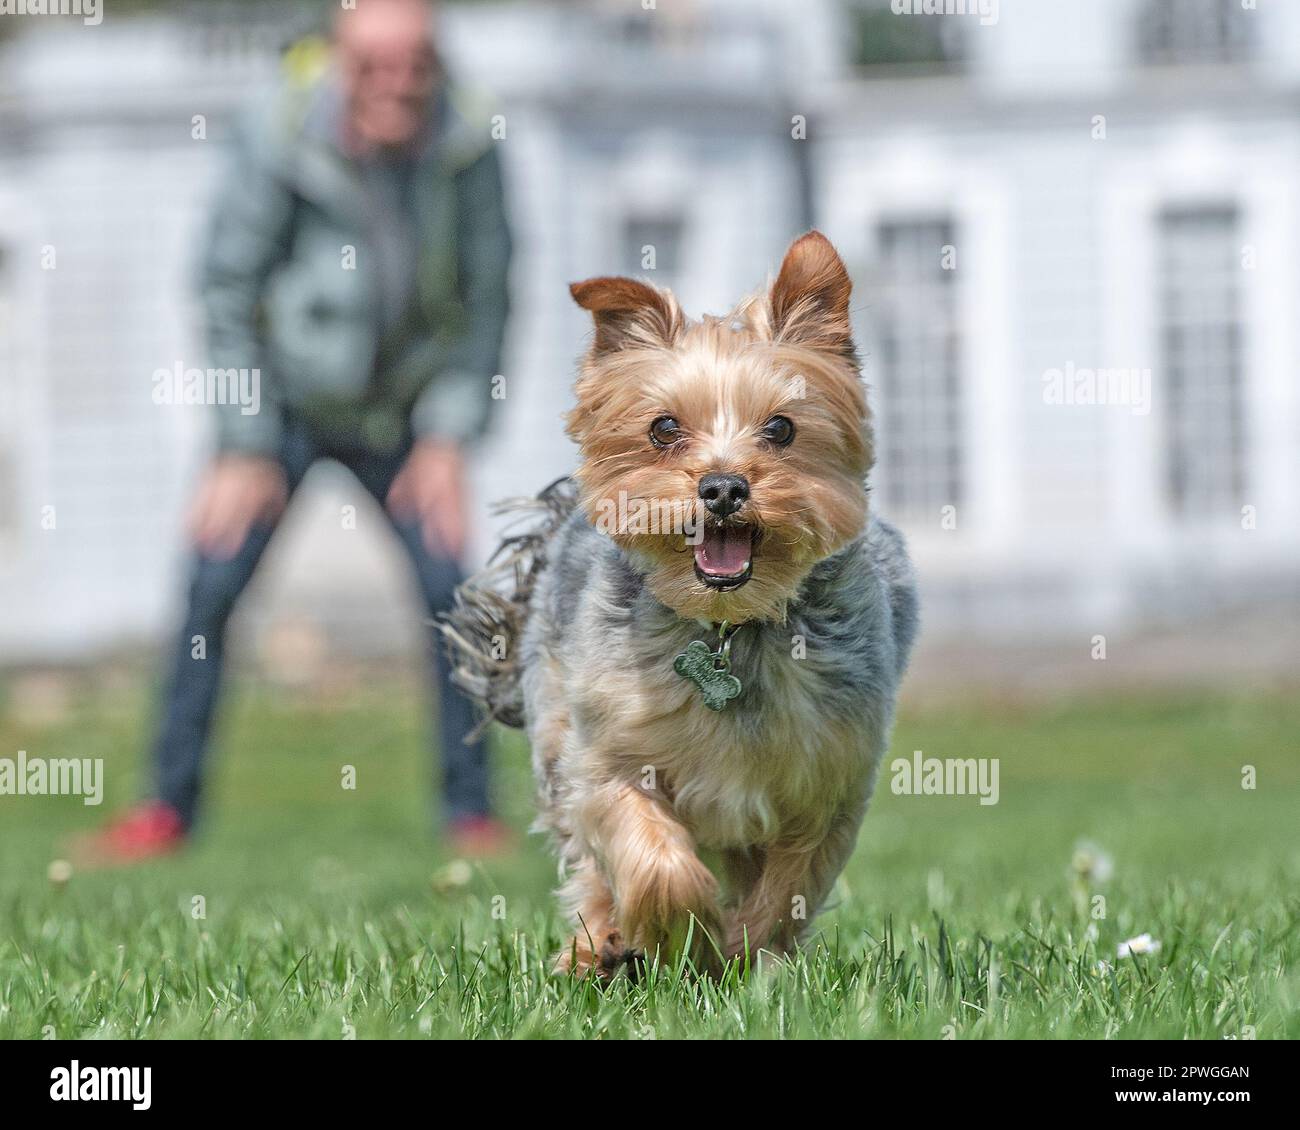 Yorkshire terrier having fun with owner Stock Photo